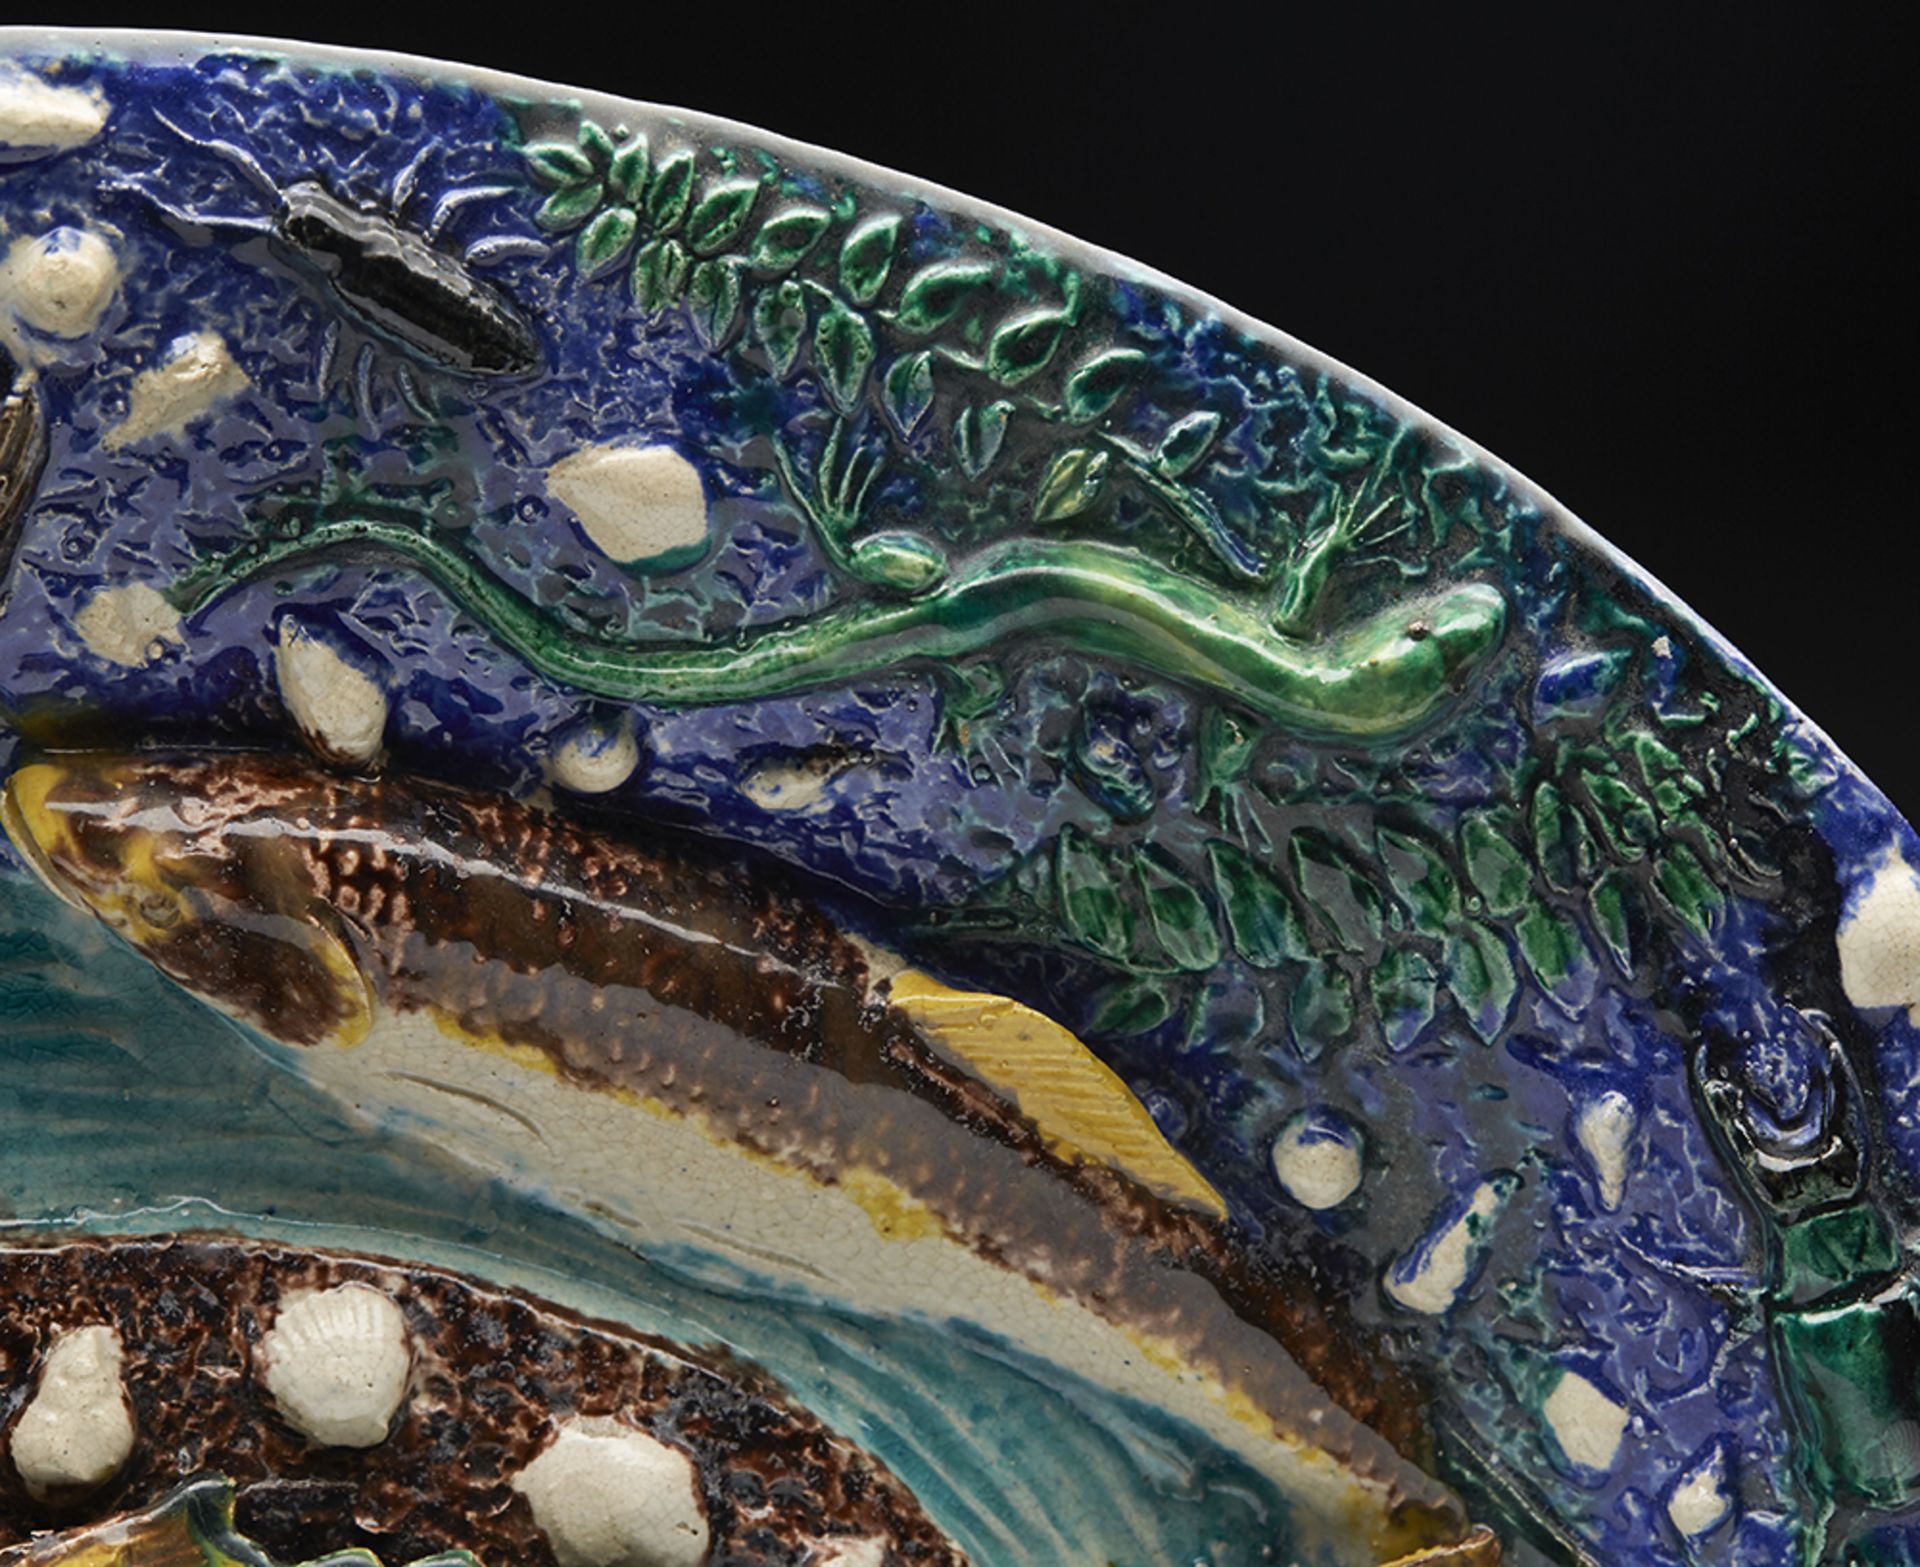 Antique French Palissy Shallow Dish With Fish By Francois Maurice C.1875-1885 - Image 8 of 10